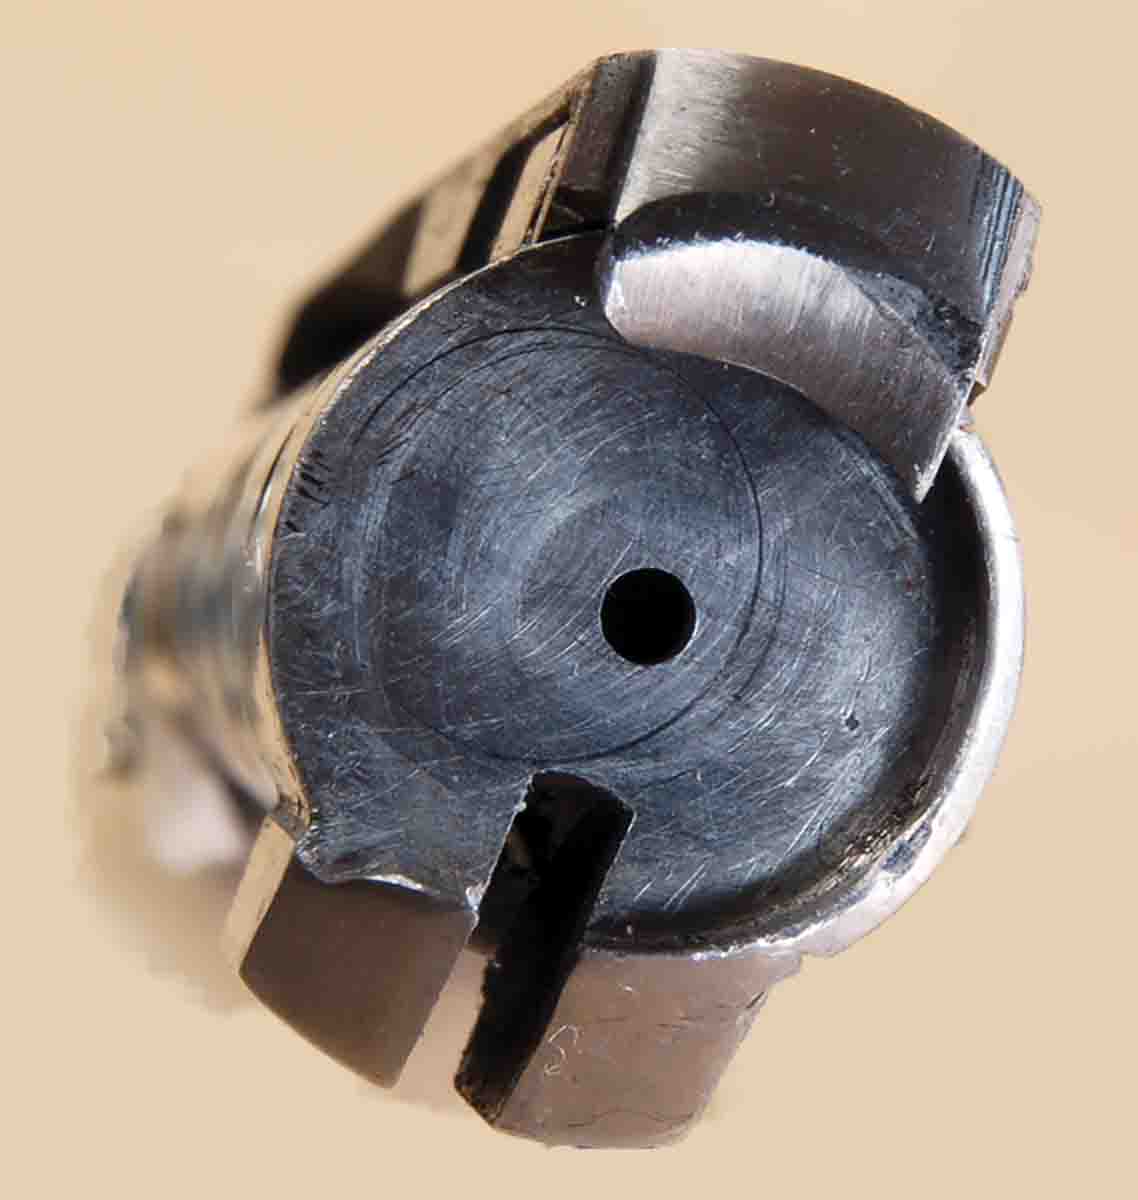 An M1917 Enfield bolt face opened up for 416 Rigby. The steel ring is only .045-inch wide, with some broken off at the bottom.